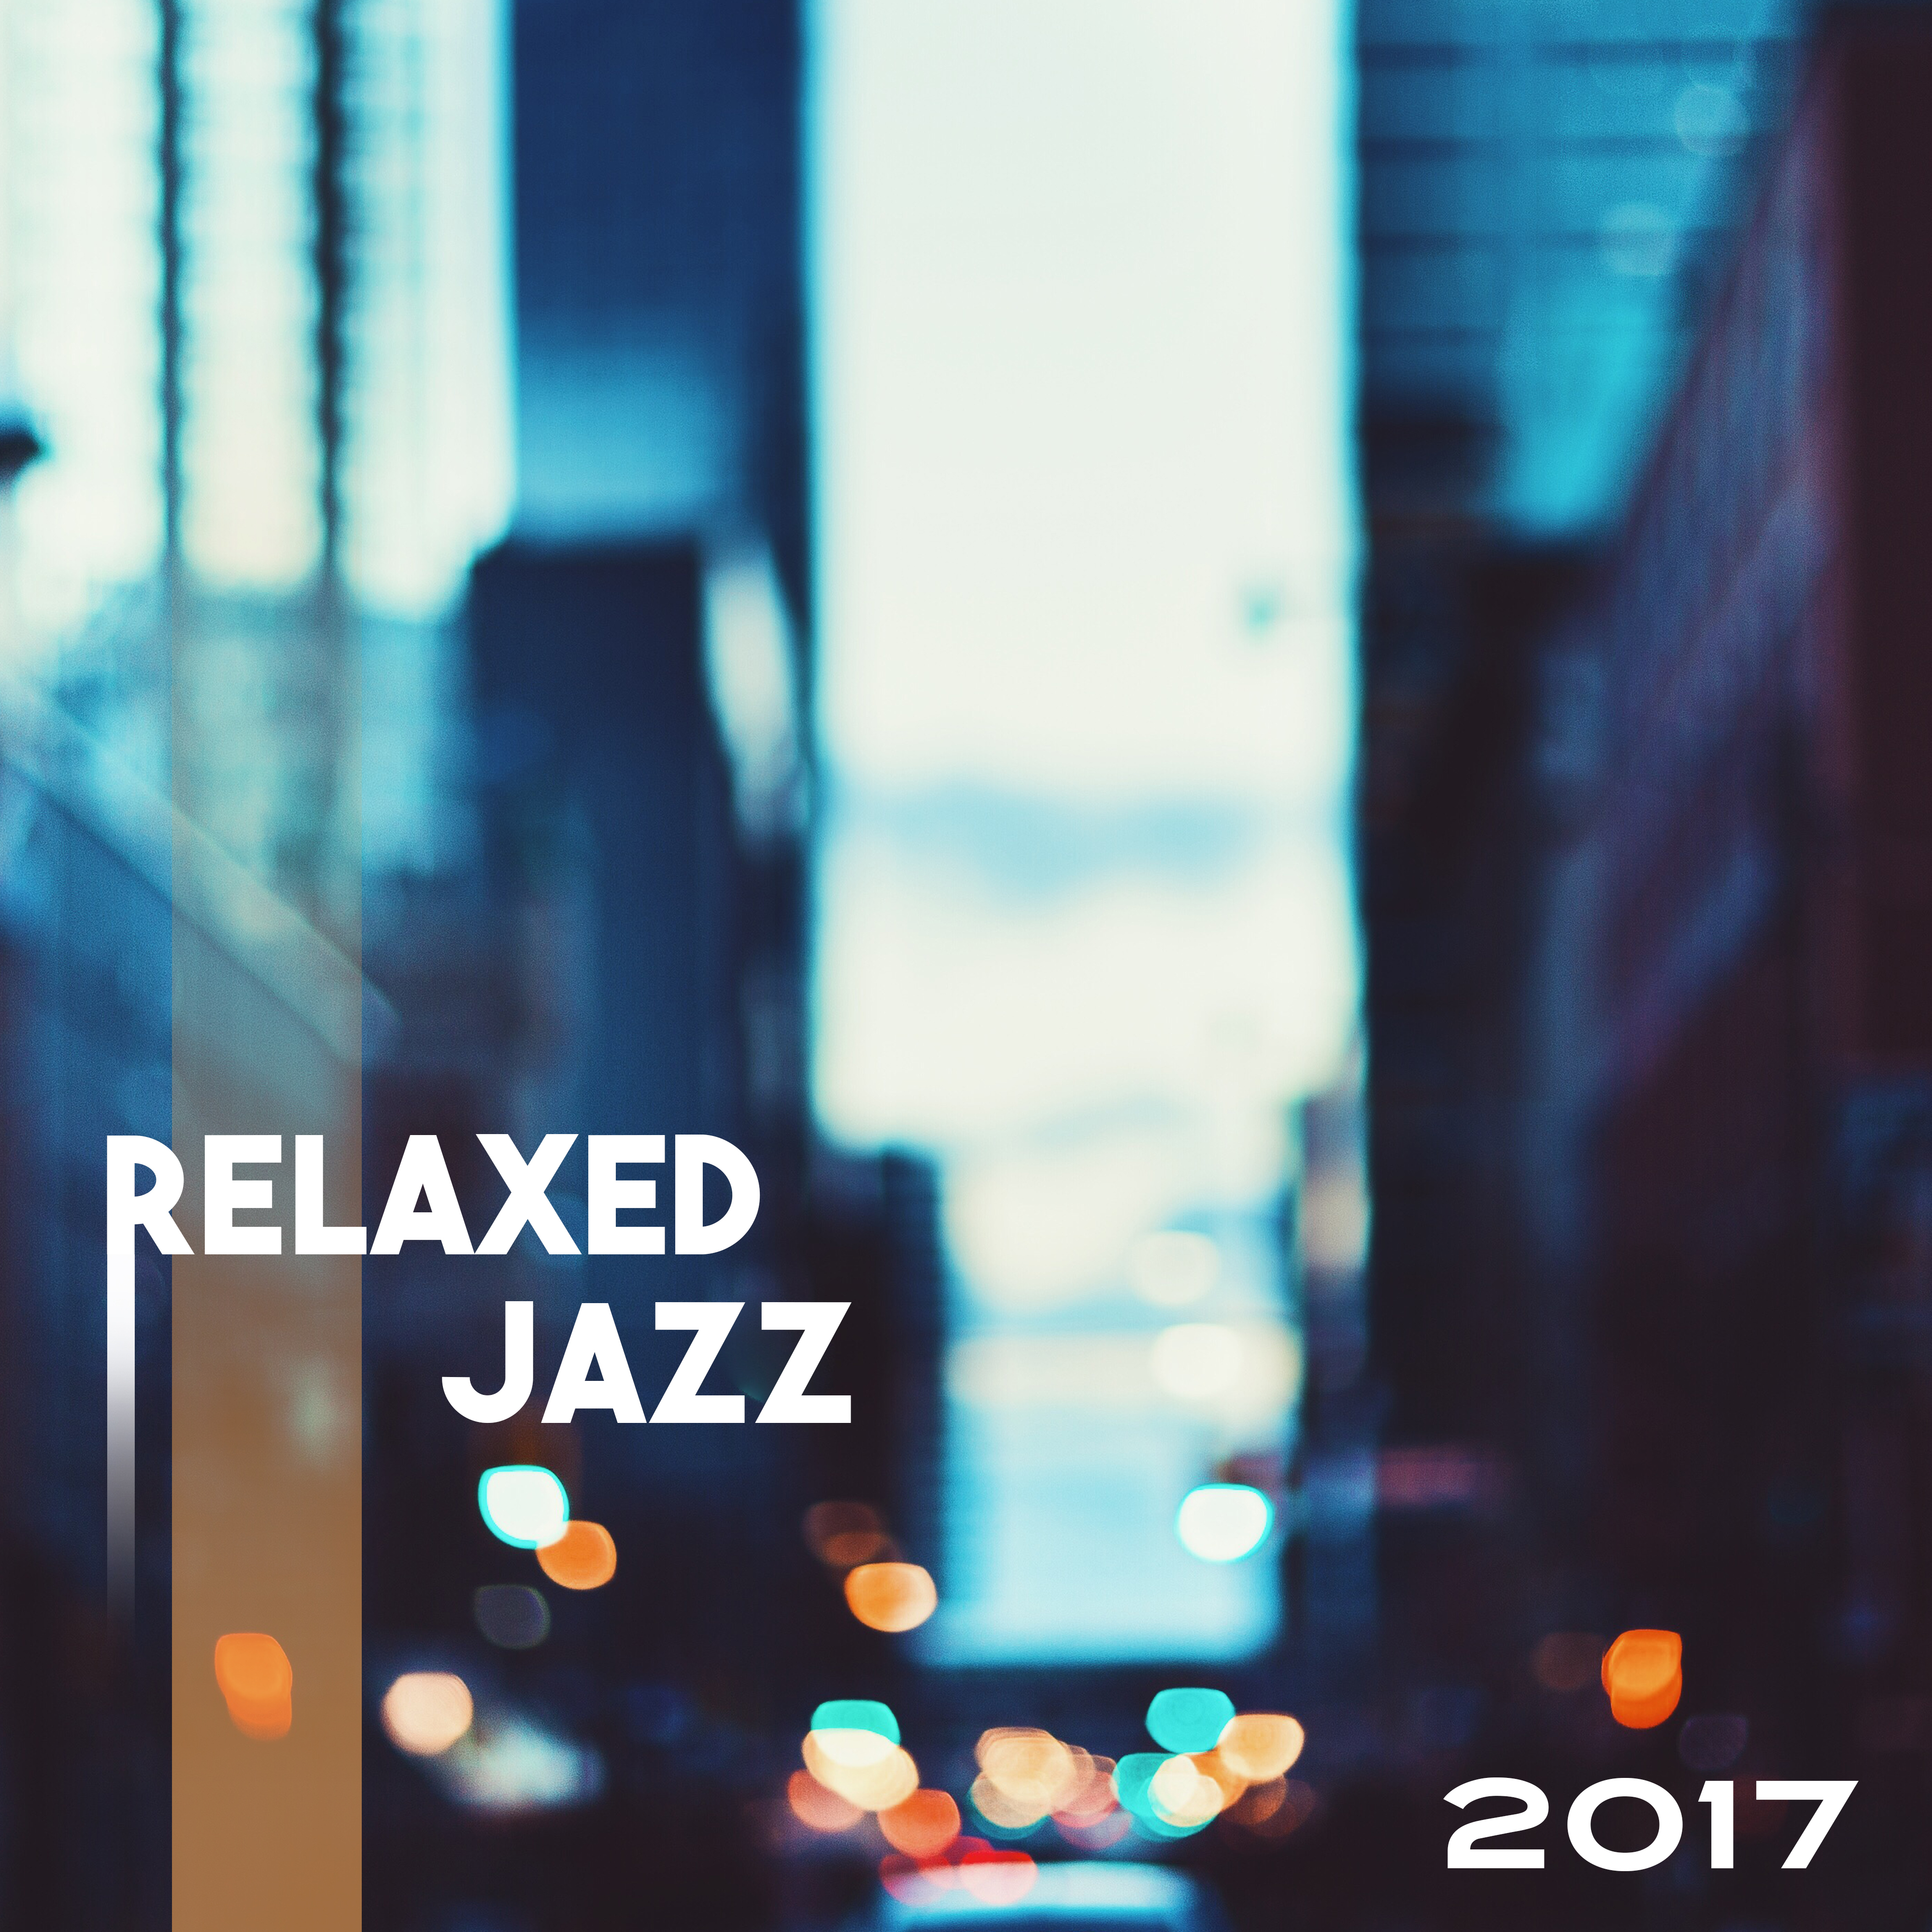 Relaxed Jazz 2017 – Peaceful Piano Songs, Instrumental Music, Jazz Lounge, Smooth Piano